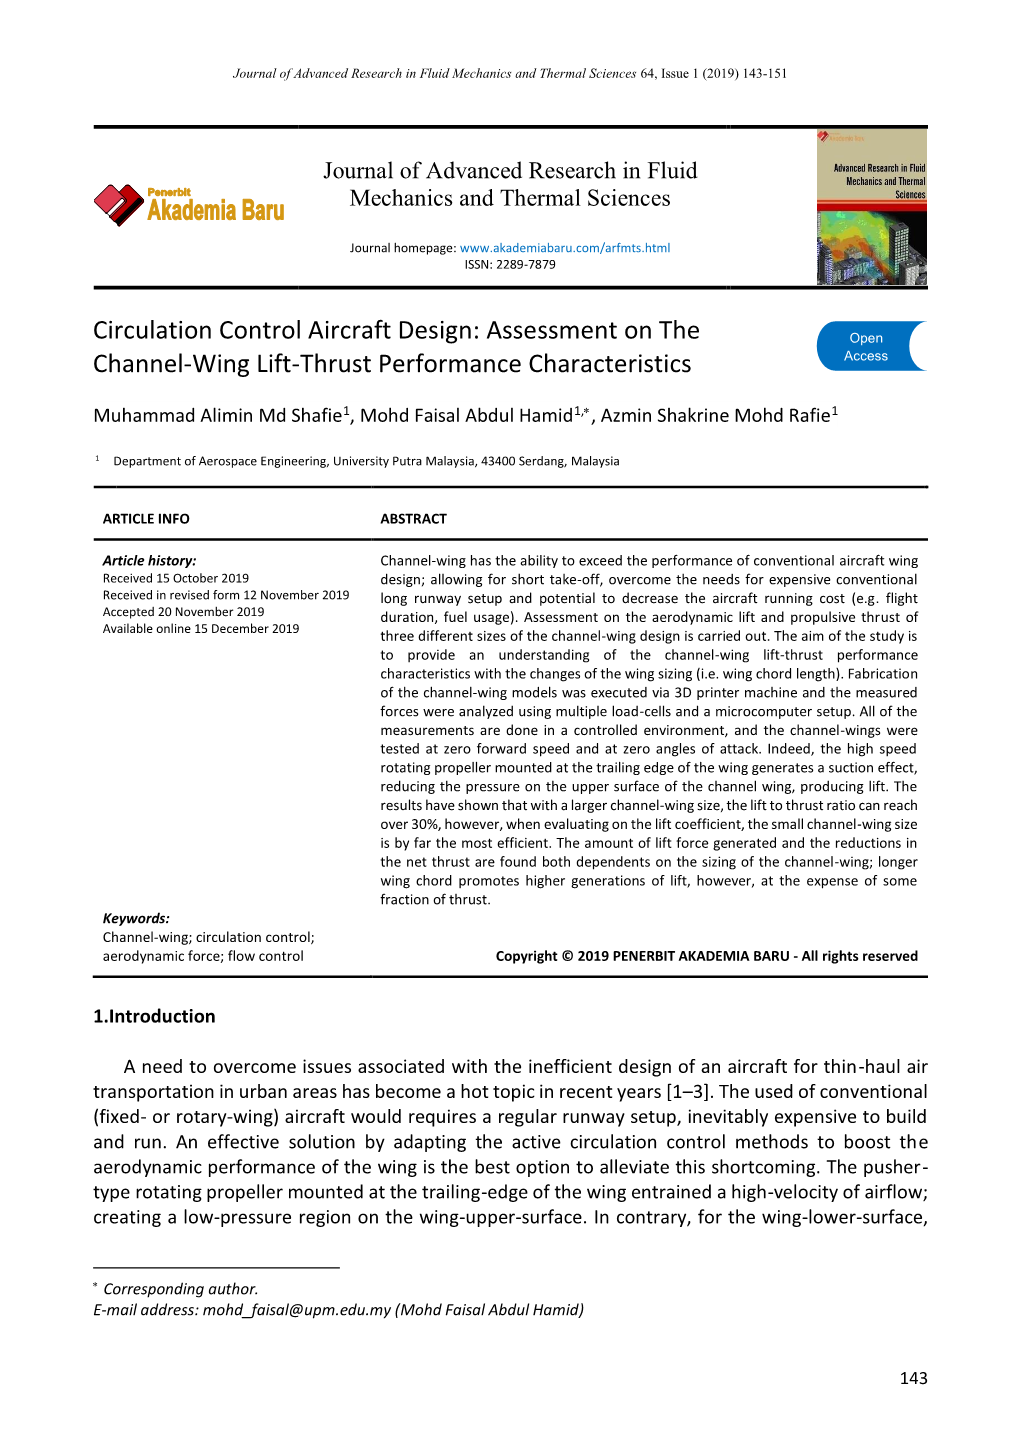 Circulation Control Aircraft Design: Assessment on the Open Access Channel-Wing Lift-Thrust Performance Characteristics